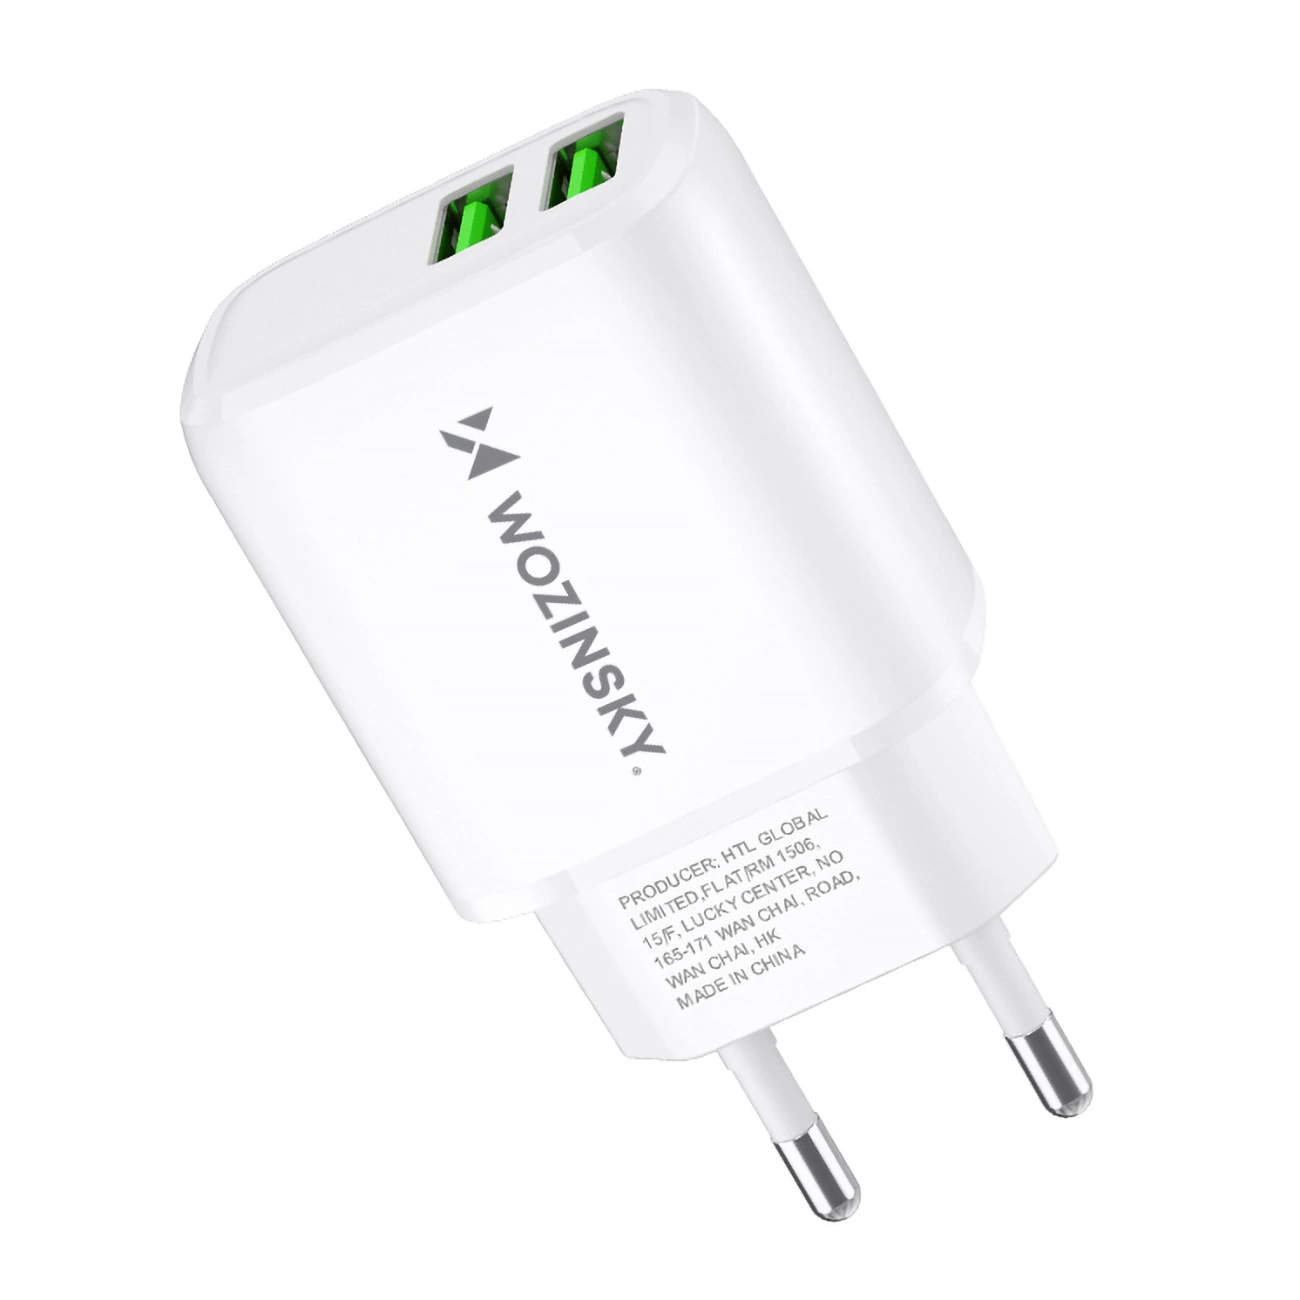 Wozinsky CUWCW 2.4A wall charger on white background